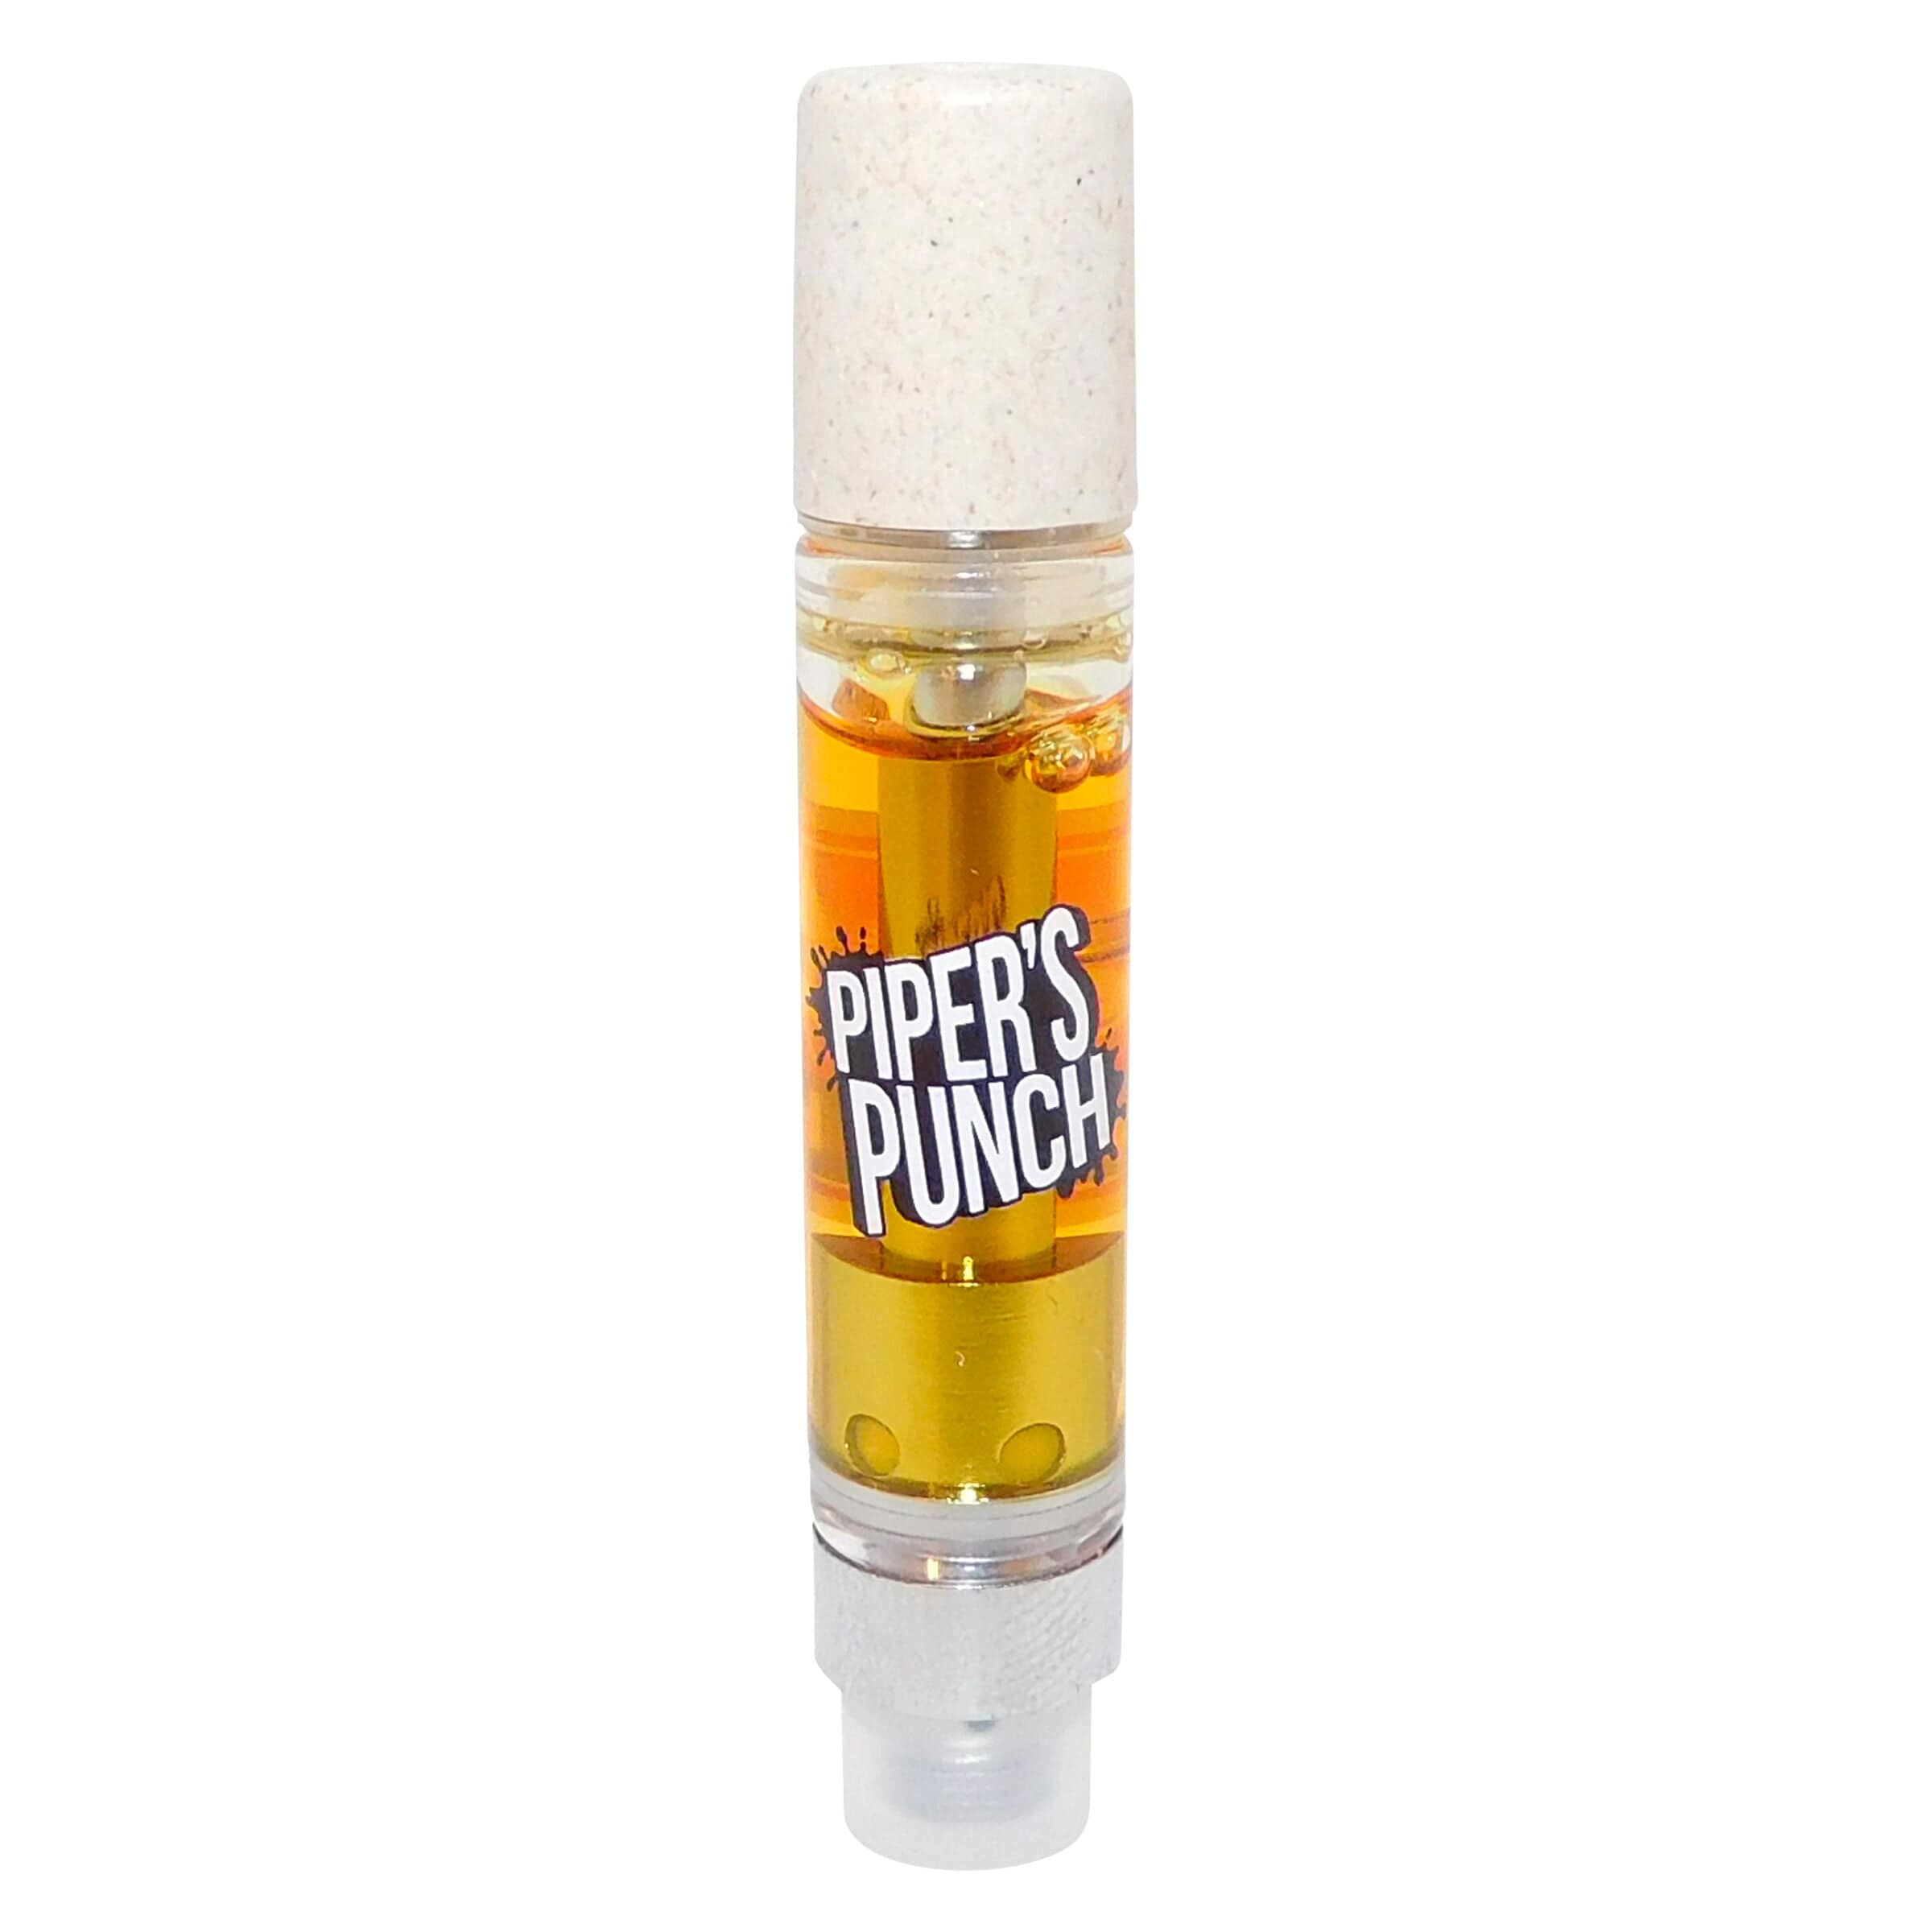 Piper's Punch 1.2g Cartridges